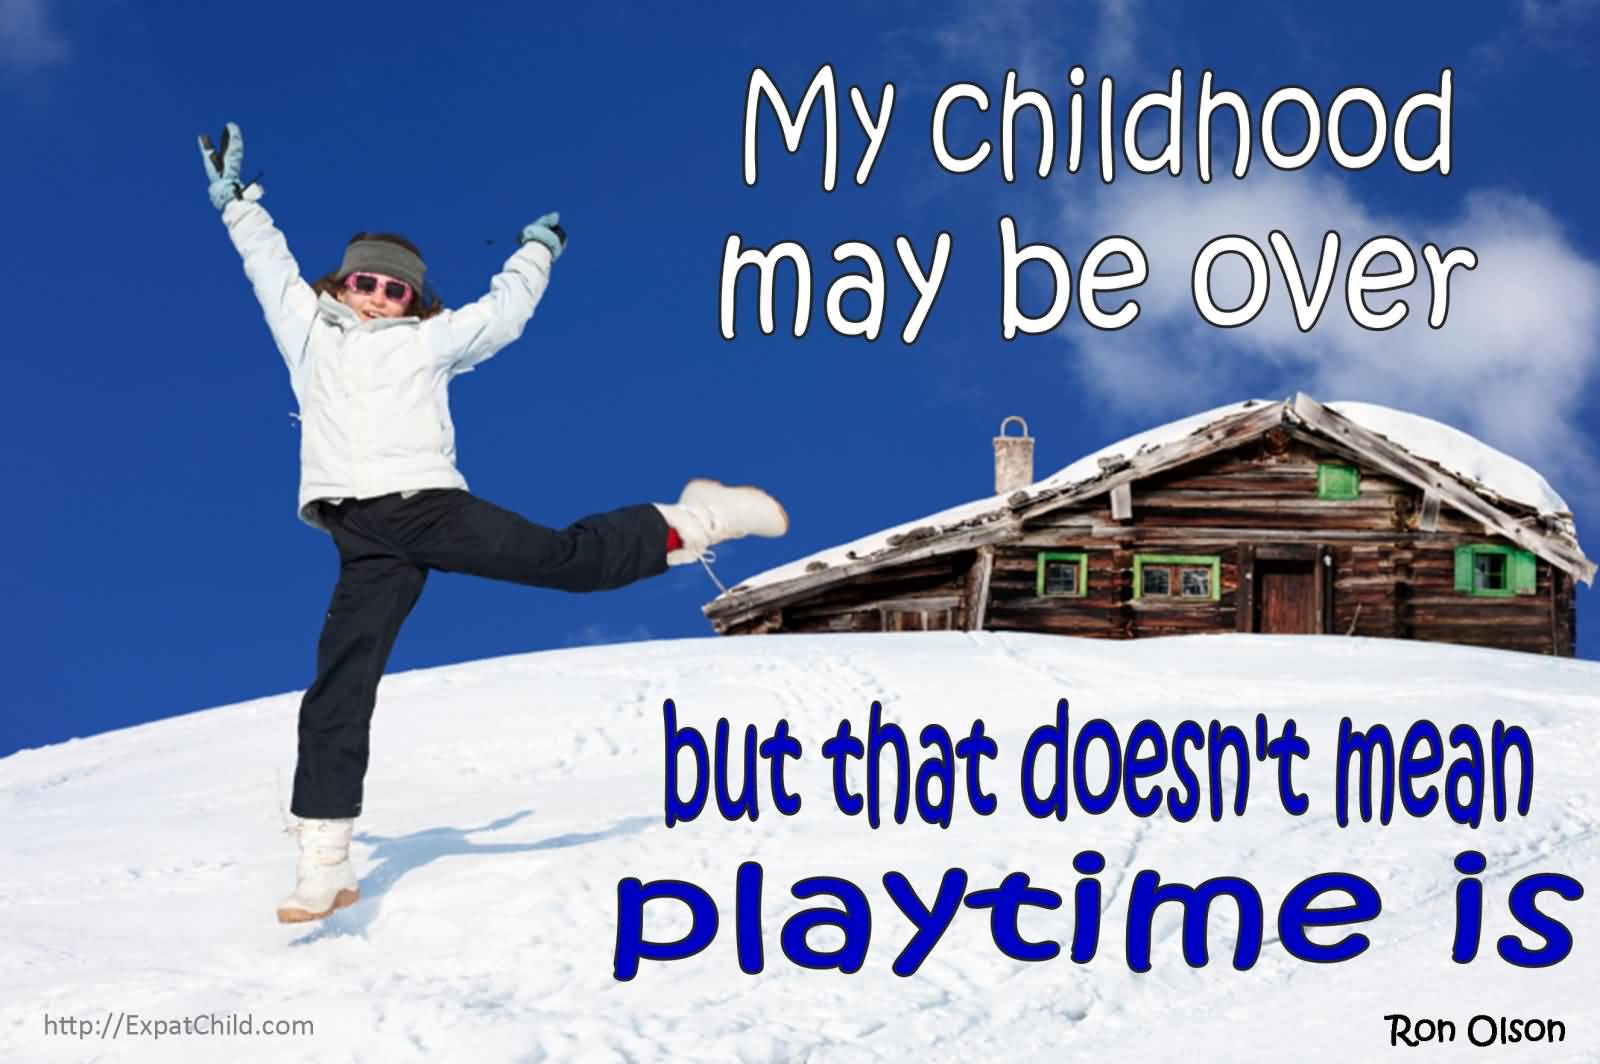 My childhood may be over, but that doesn't mean playtime is